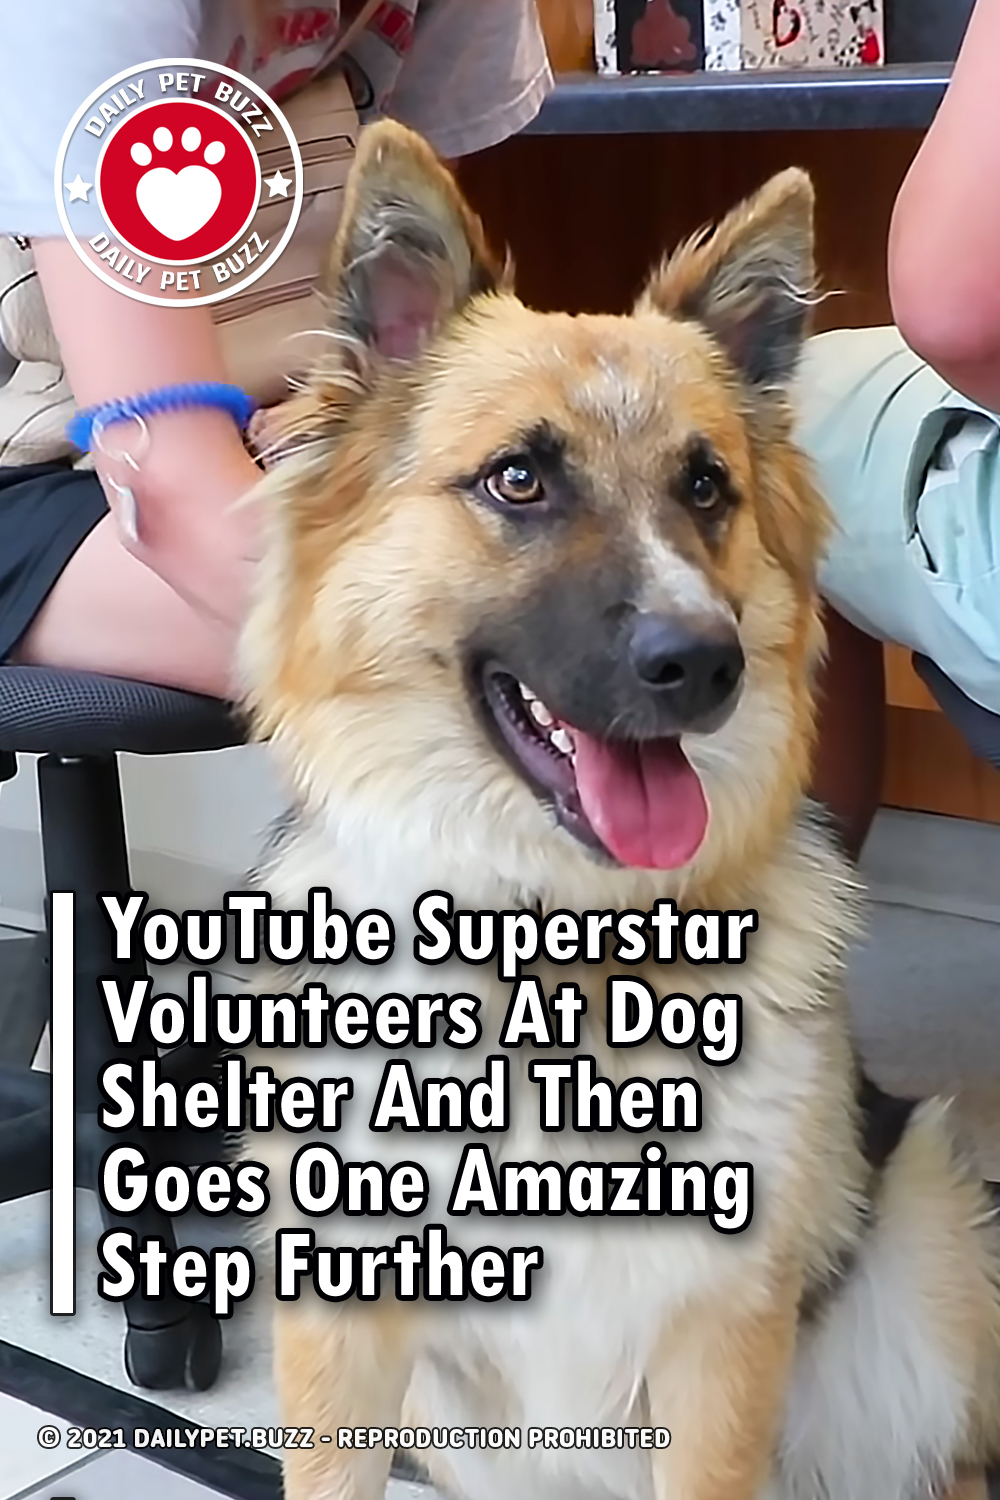 YouTube Superstar Volunteers At Dog Shelter And Then Goes One Amazing Step Further